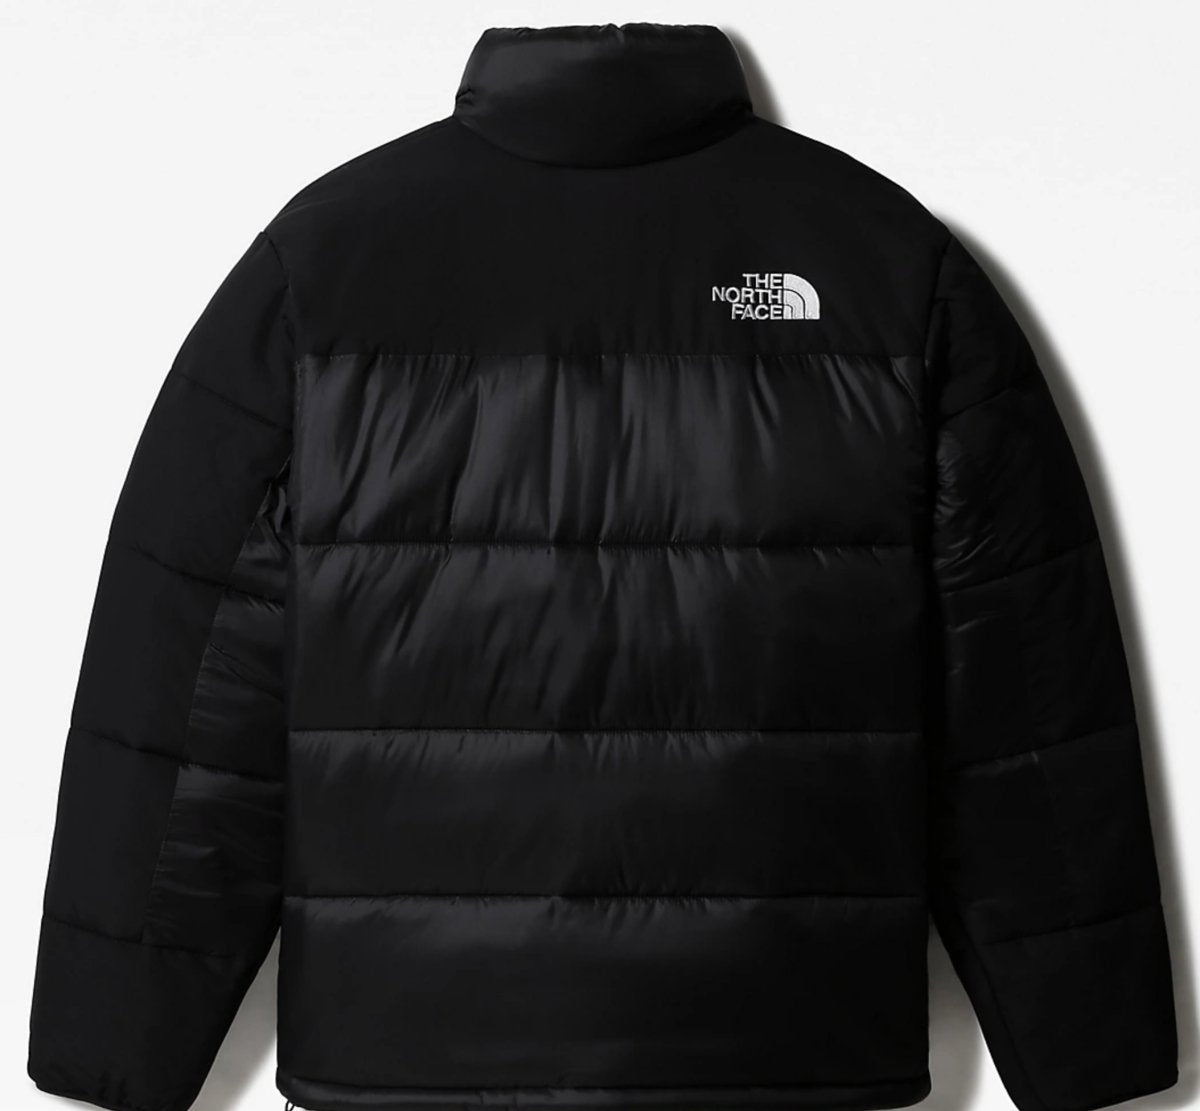 NF HMLYN insulated Jacket TNF Black - KYOTO - The North Face